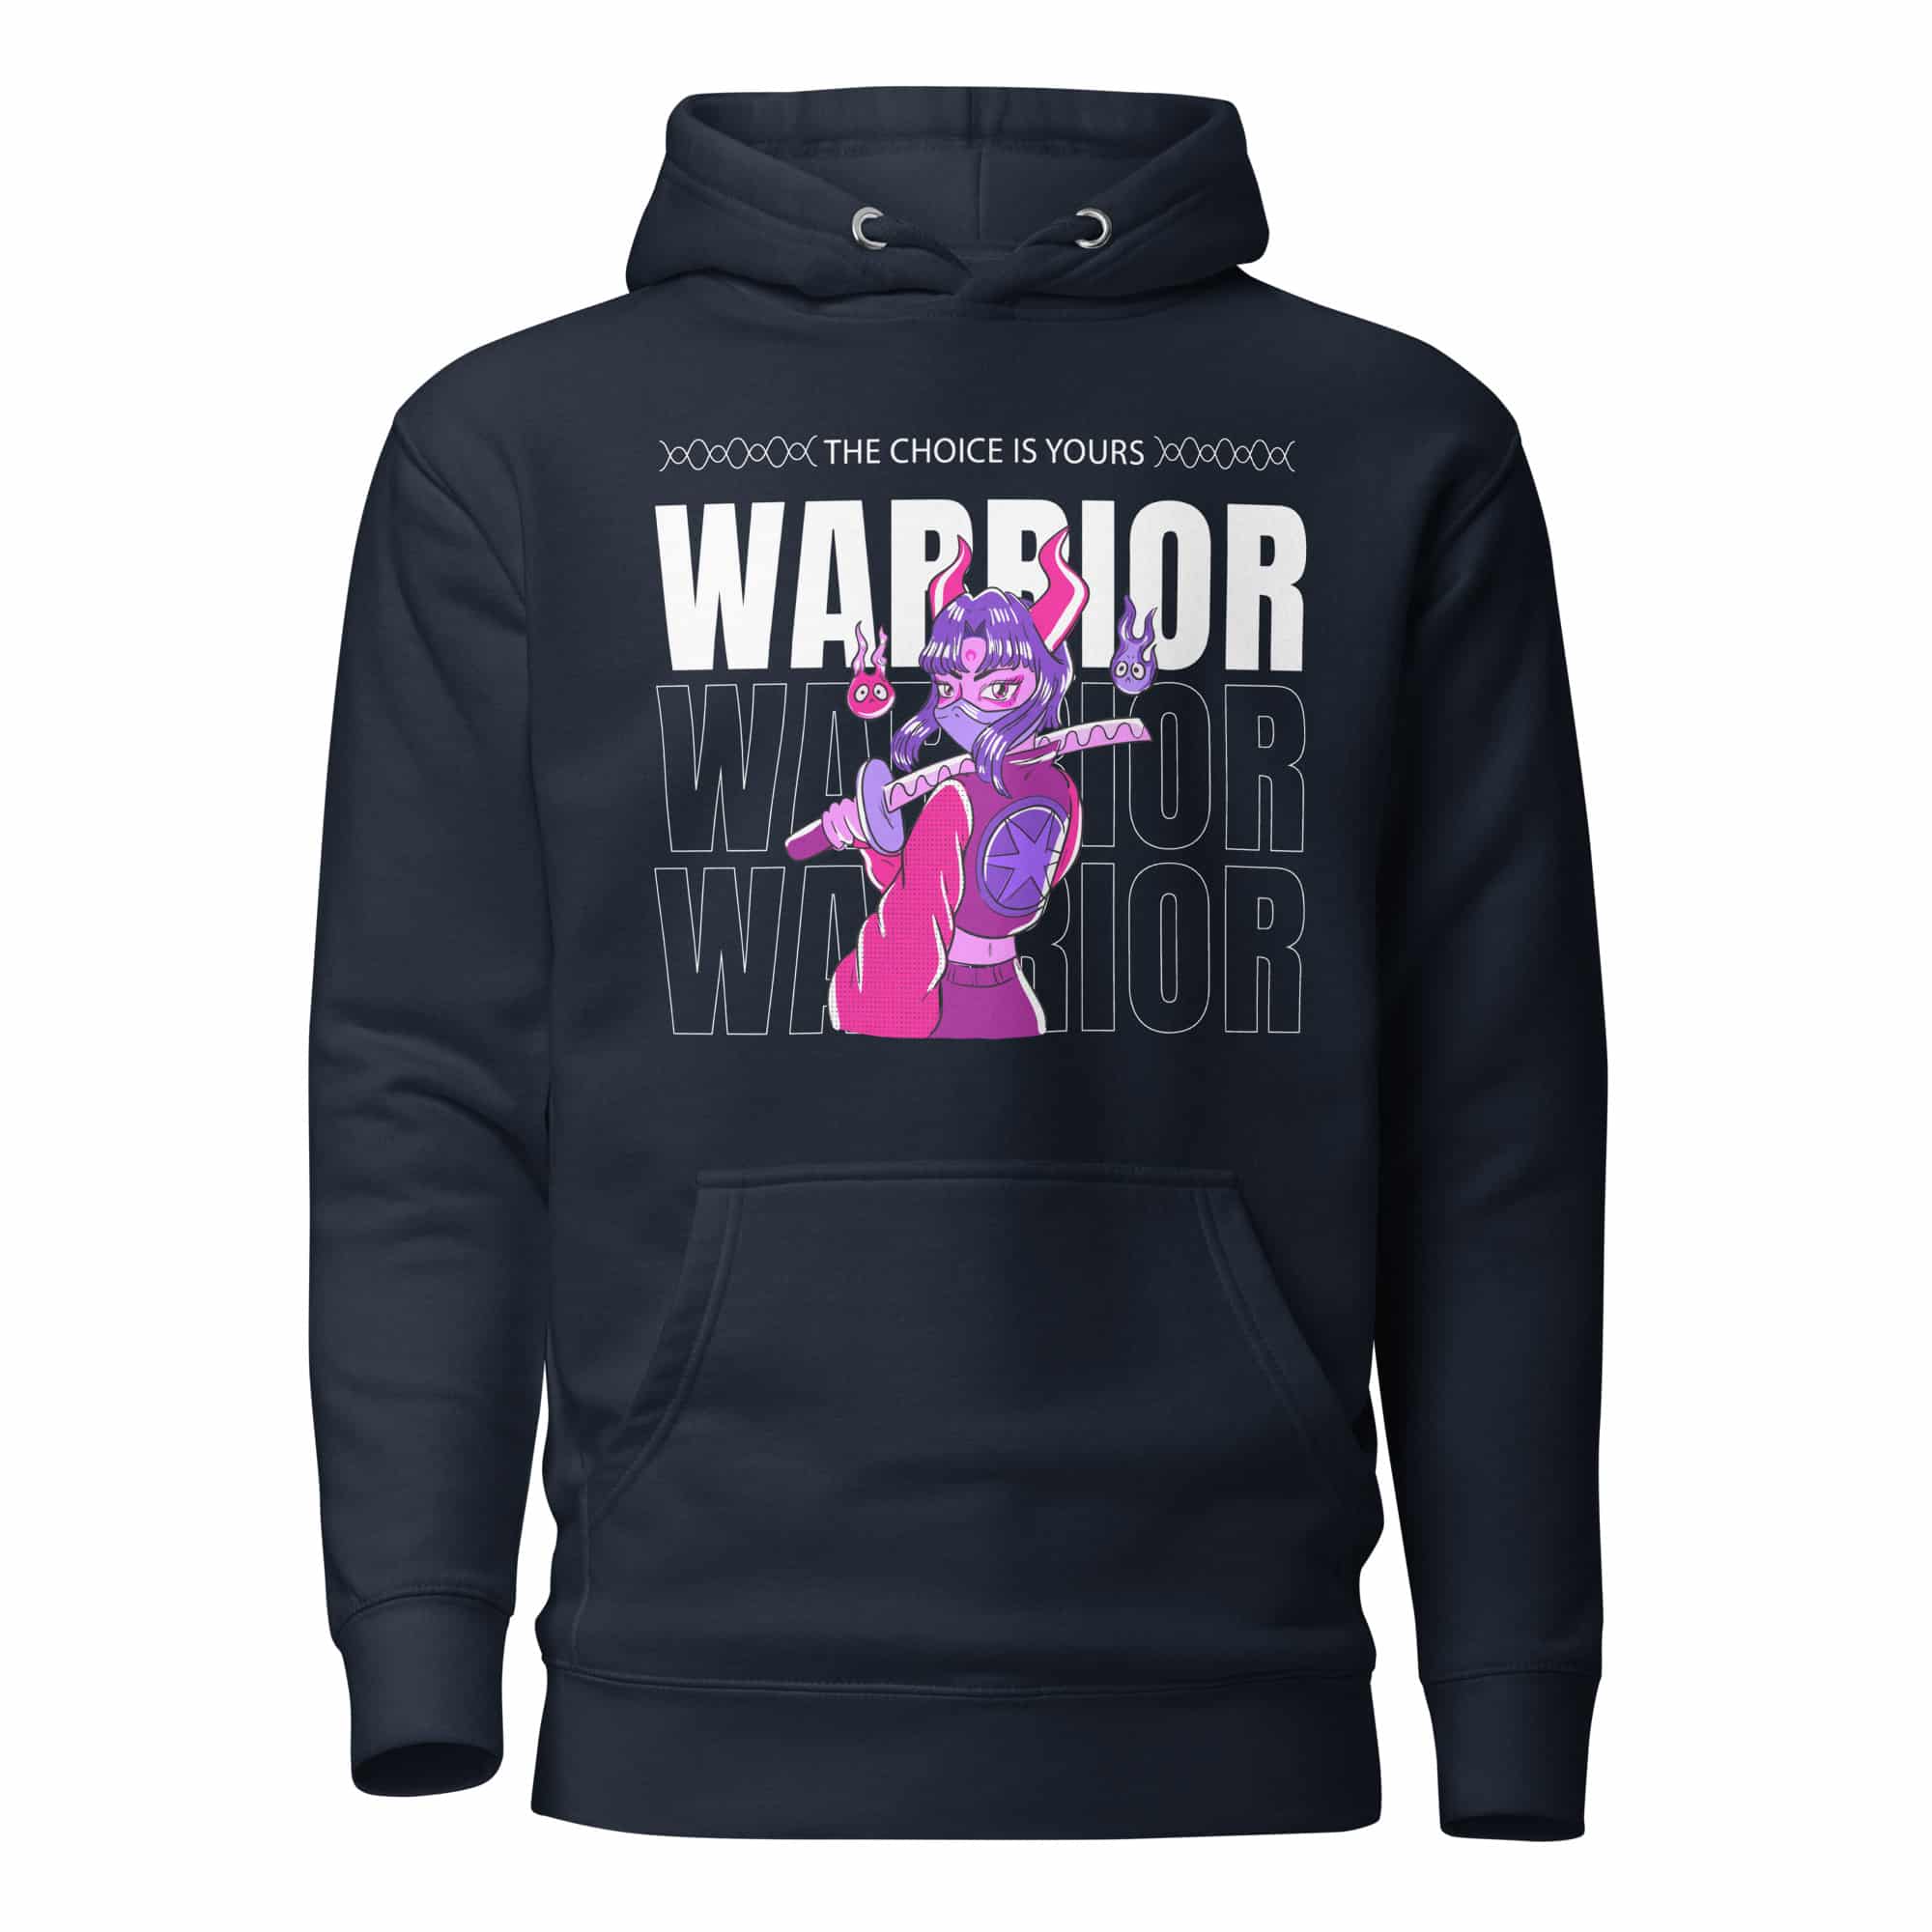 Gaming Warrior Hoodie Video game store Gaming merchandise Gaming accessories shop Online gaming store Video game shop near me Gaming console store PC gaming store Gaming gear shop Retro gaming shop Board game shop Anime merchandise Anime store online Japanese anime shop Anime figurines Manga shop Anime DVDs Anime accessories Anime apparel Anime collectibles Anime gifts